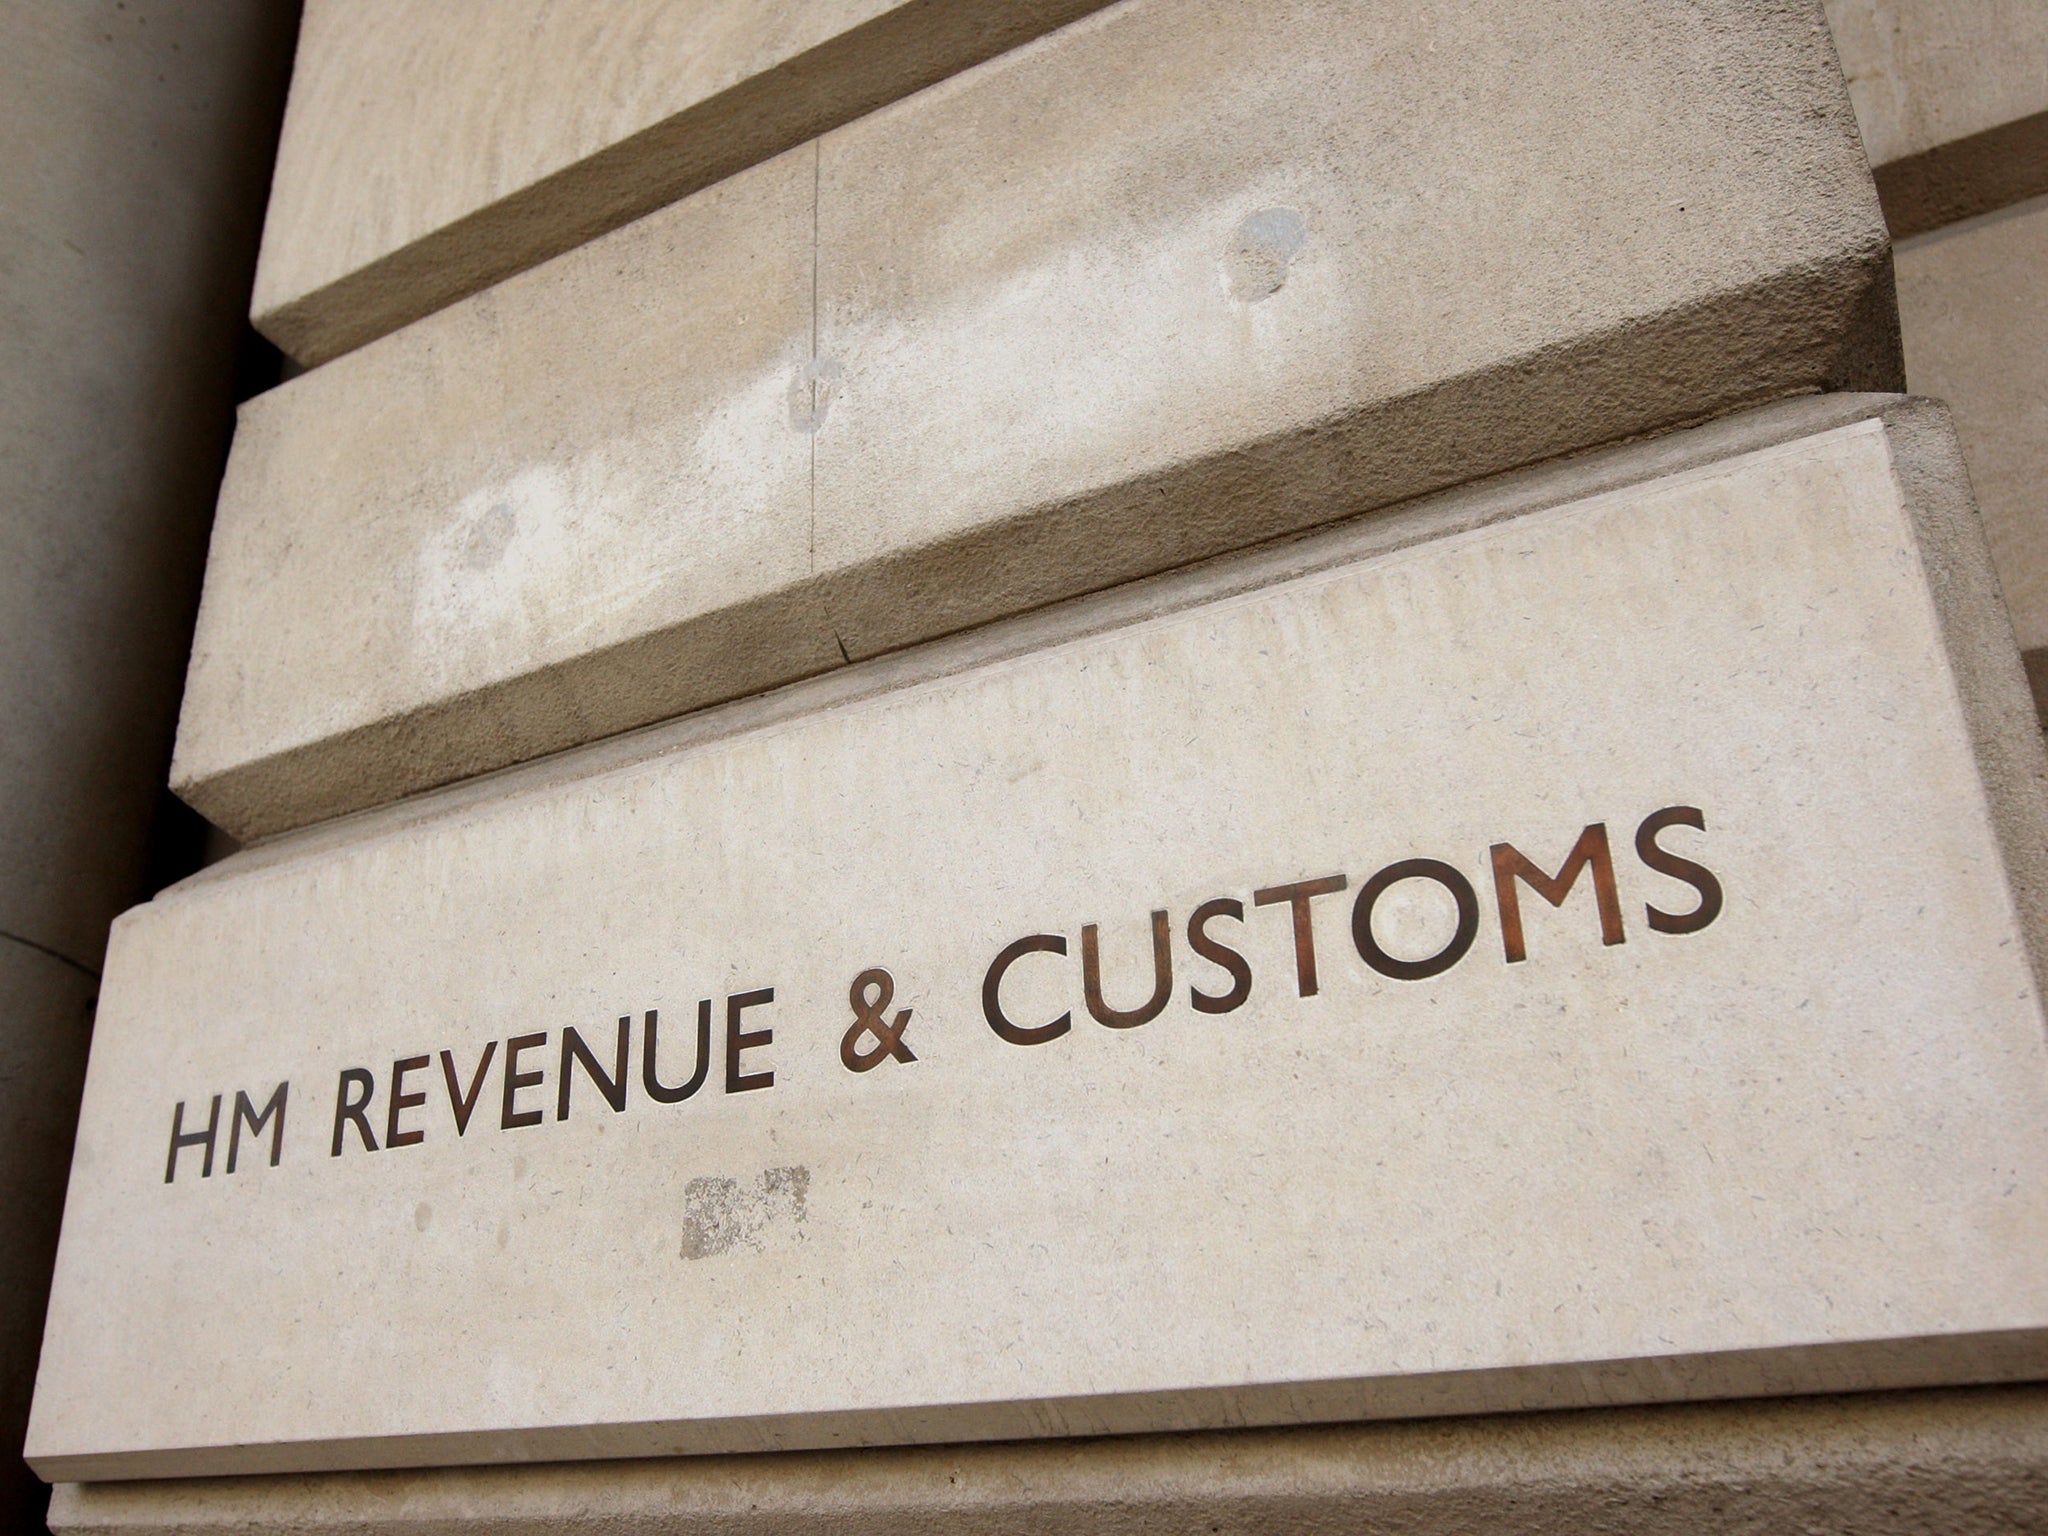 Concentrix, part of a multi-billion pound US business services company, has been accused of going on a vast “fishing expedition” as part of its contract with HMRC